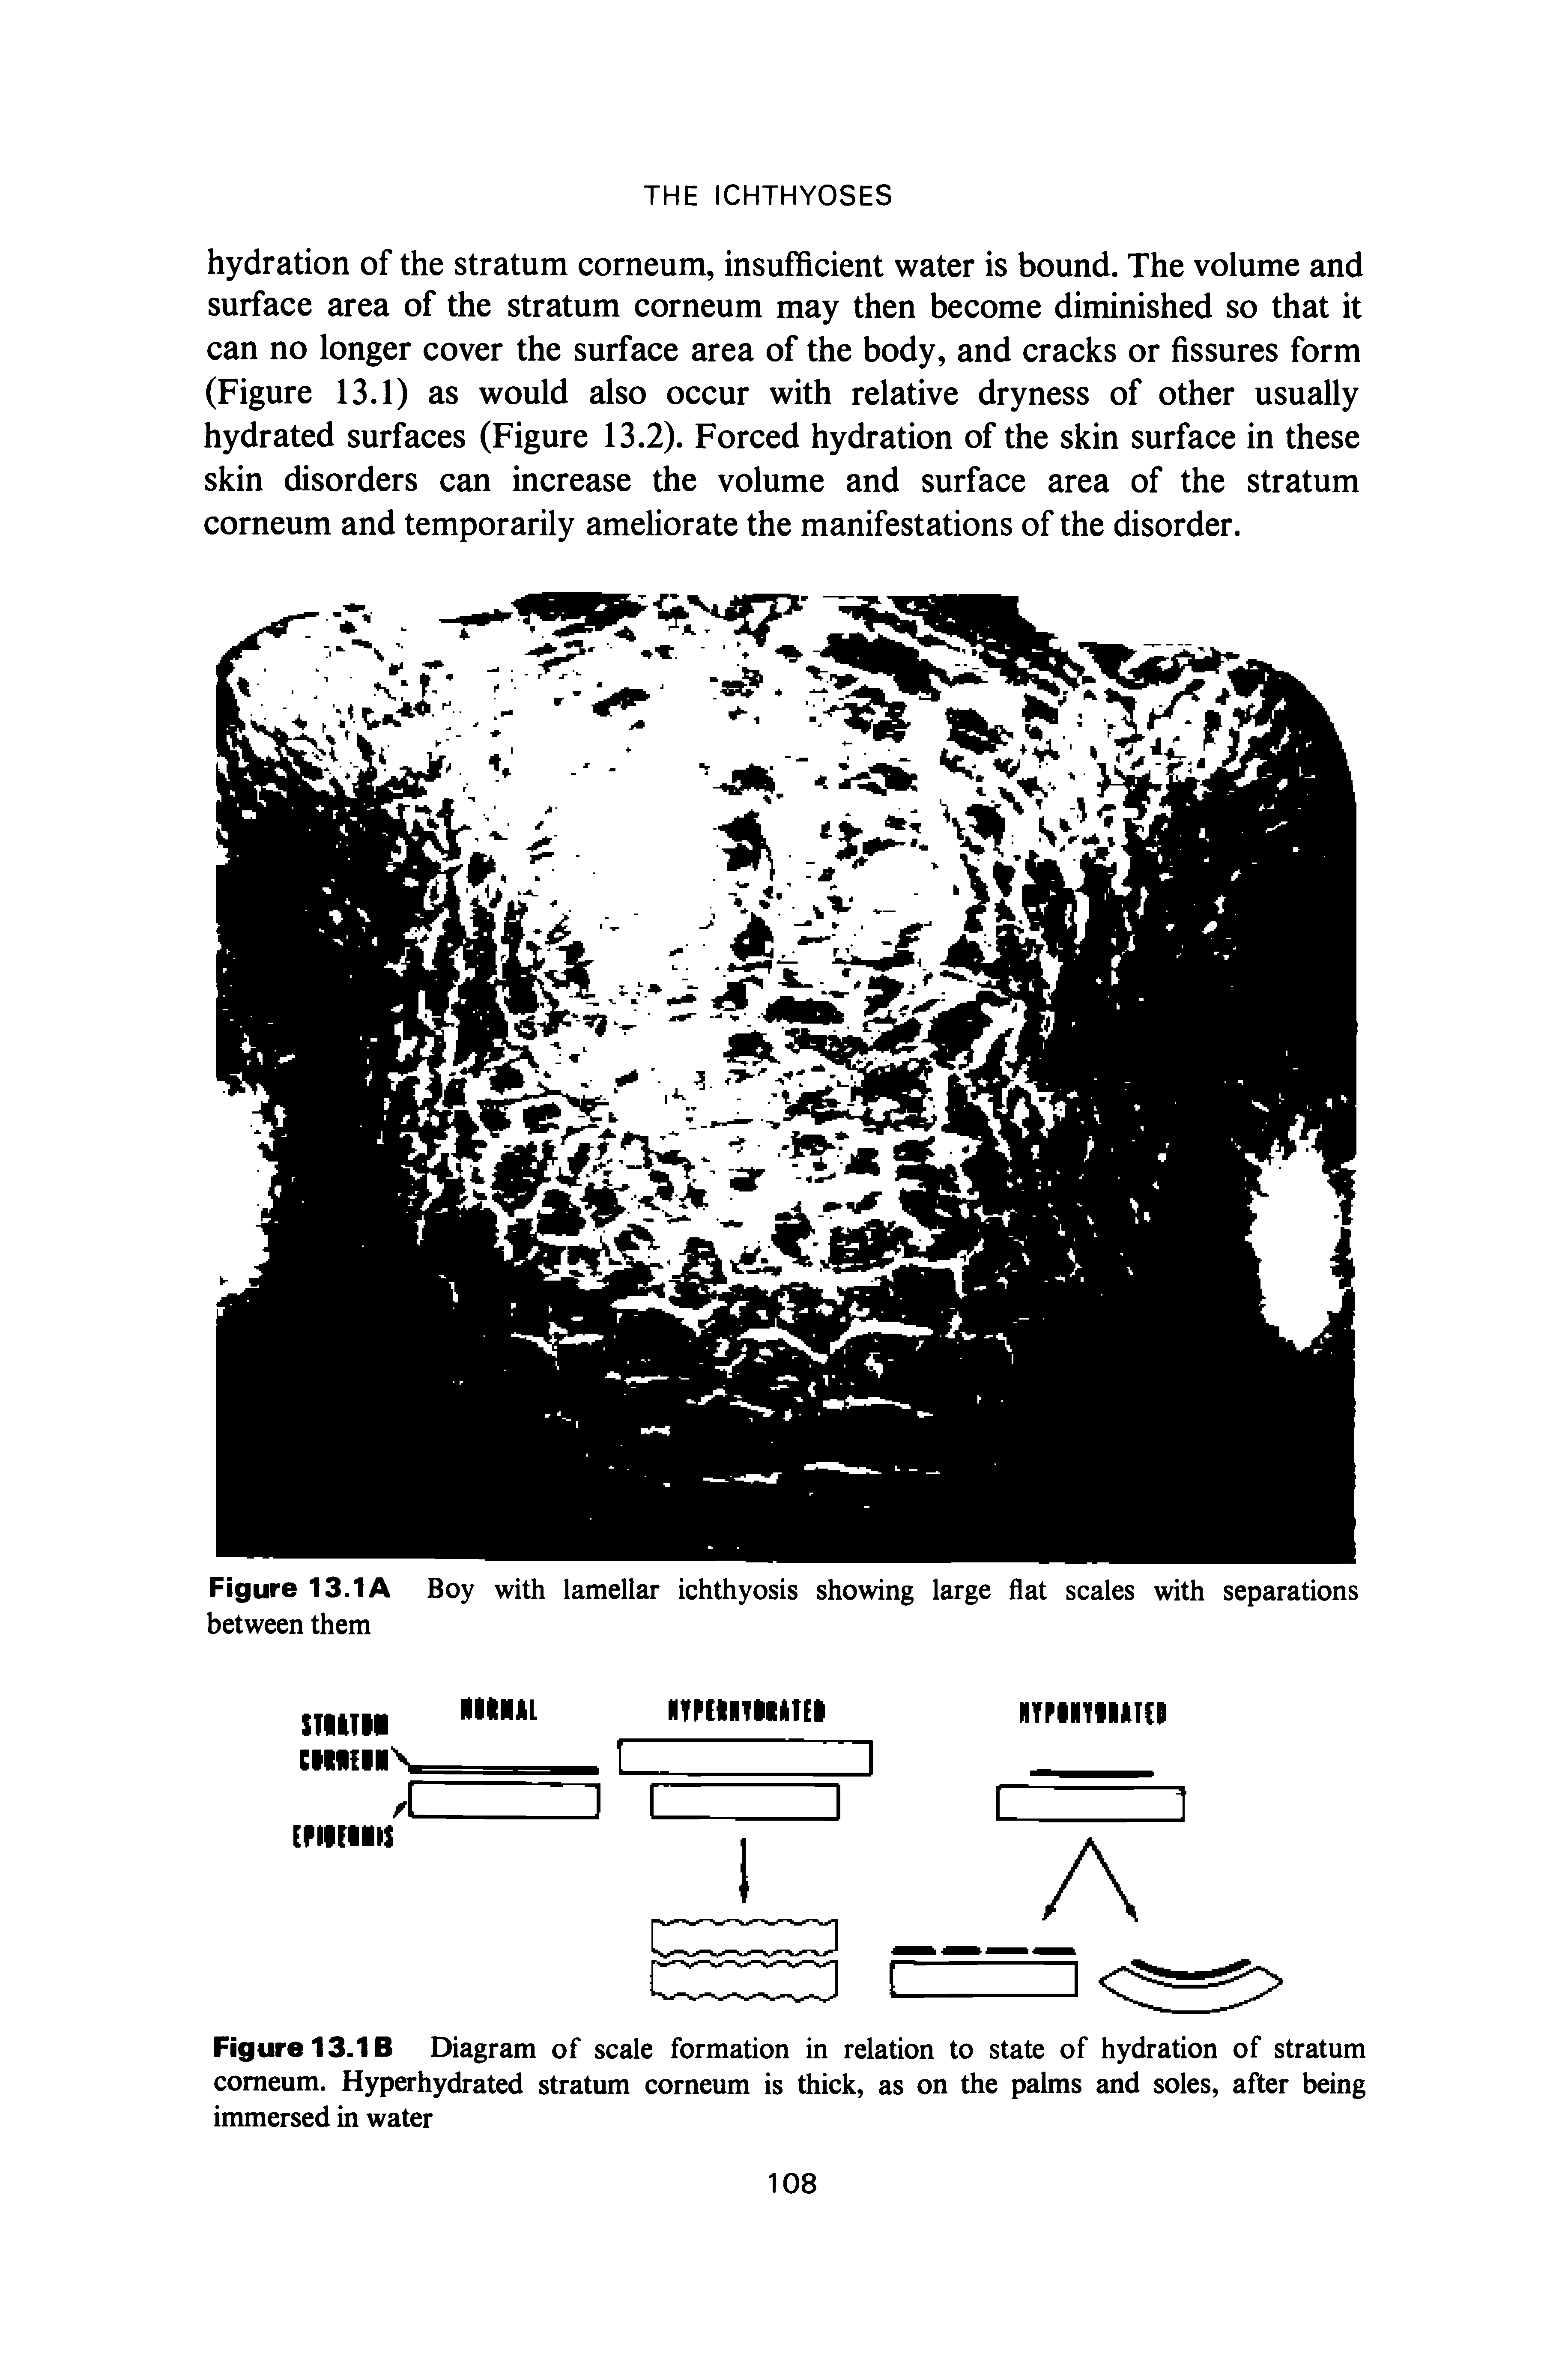 Figure 13.1 B Diagram of scale formation in relation to state of hydration of stratum corneum. Hyperhydrated stratum corneum is thick, as on the palms and soles, after being immersed in water...